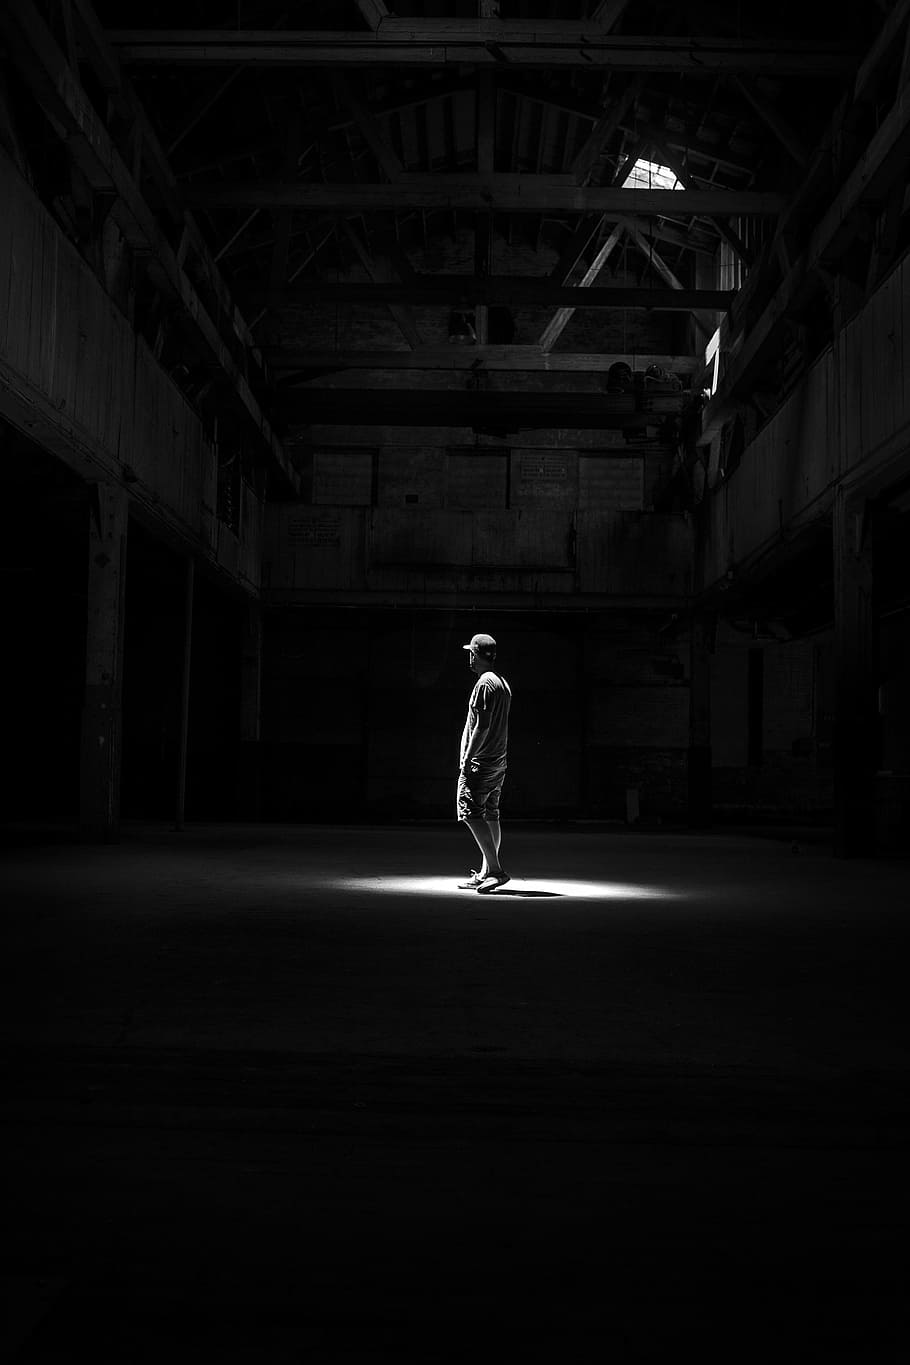 man standing on the light, grayscale photo of person standing in middle of empty building with light passing through its roof